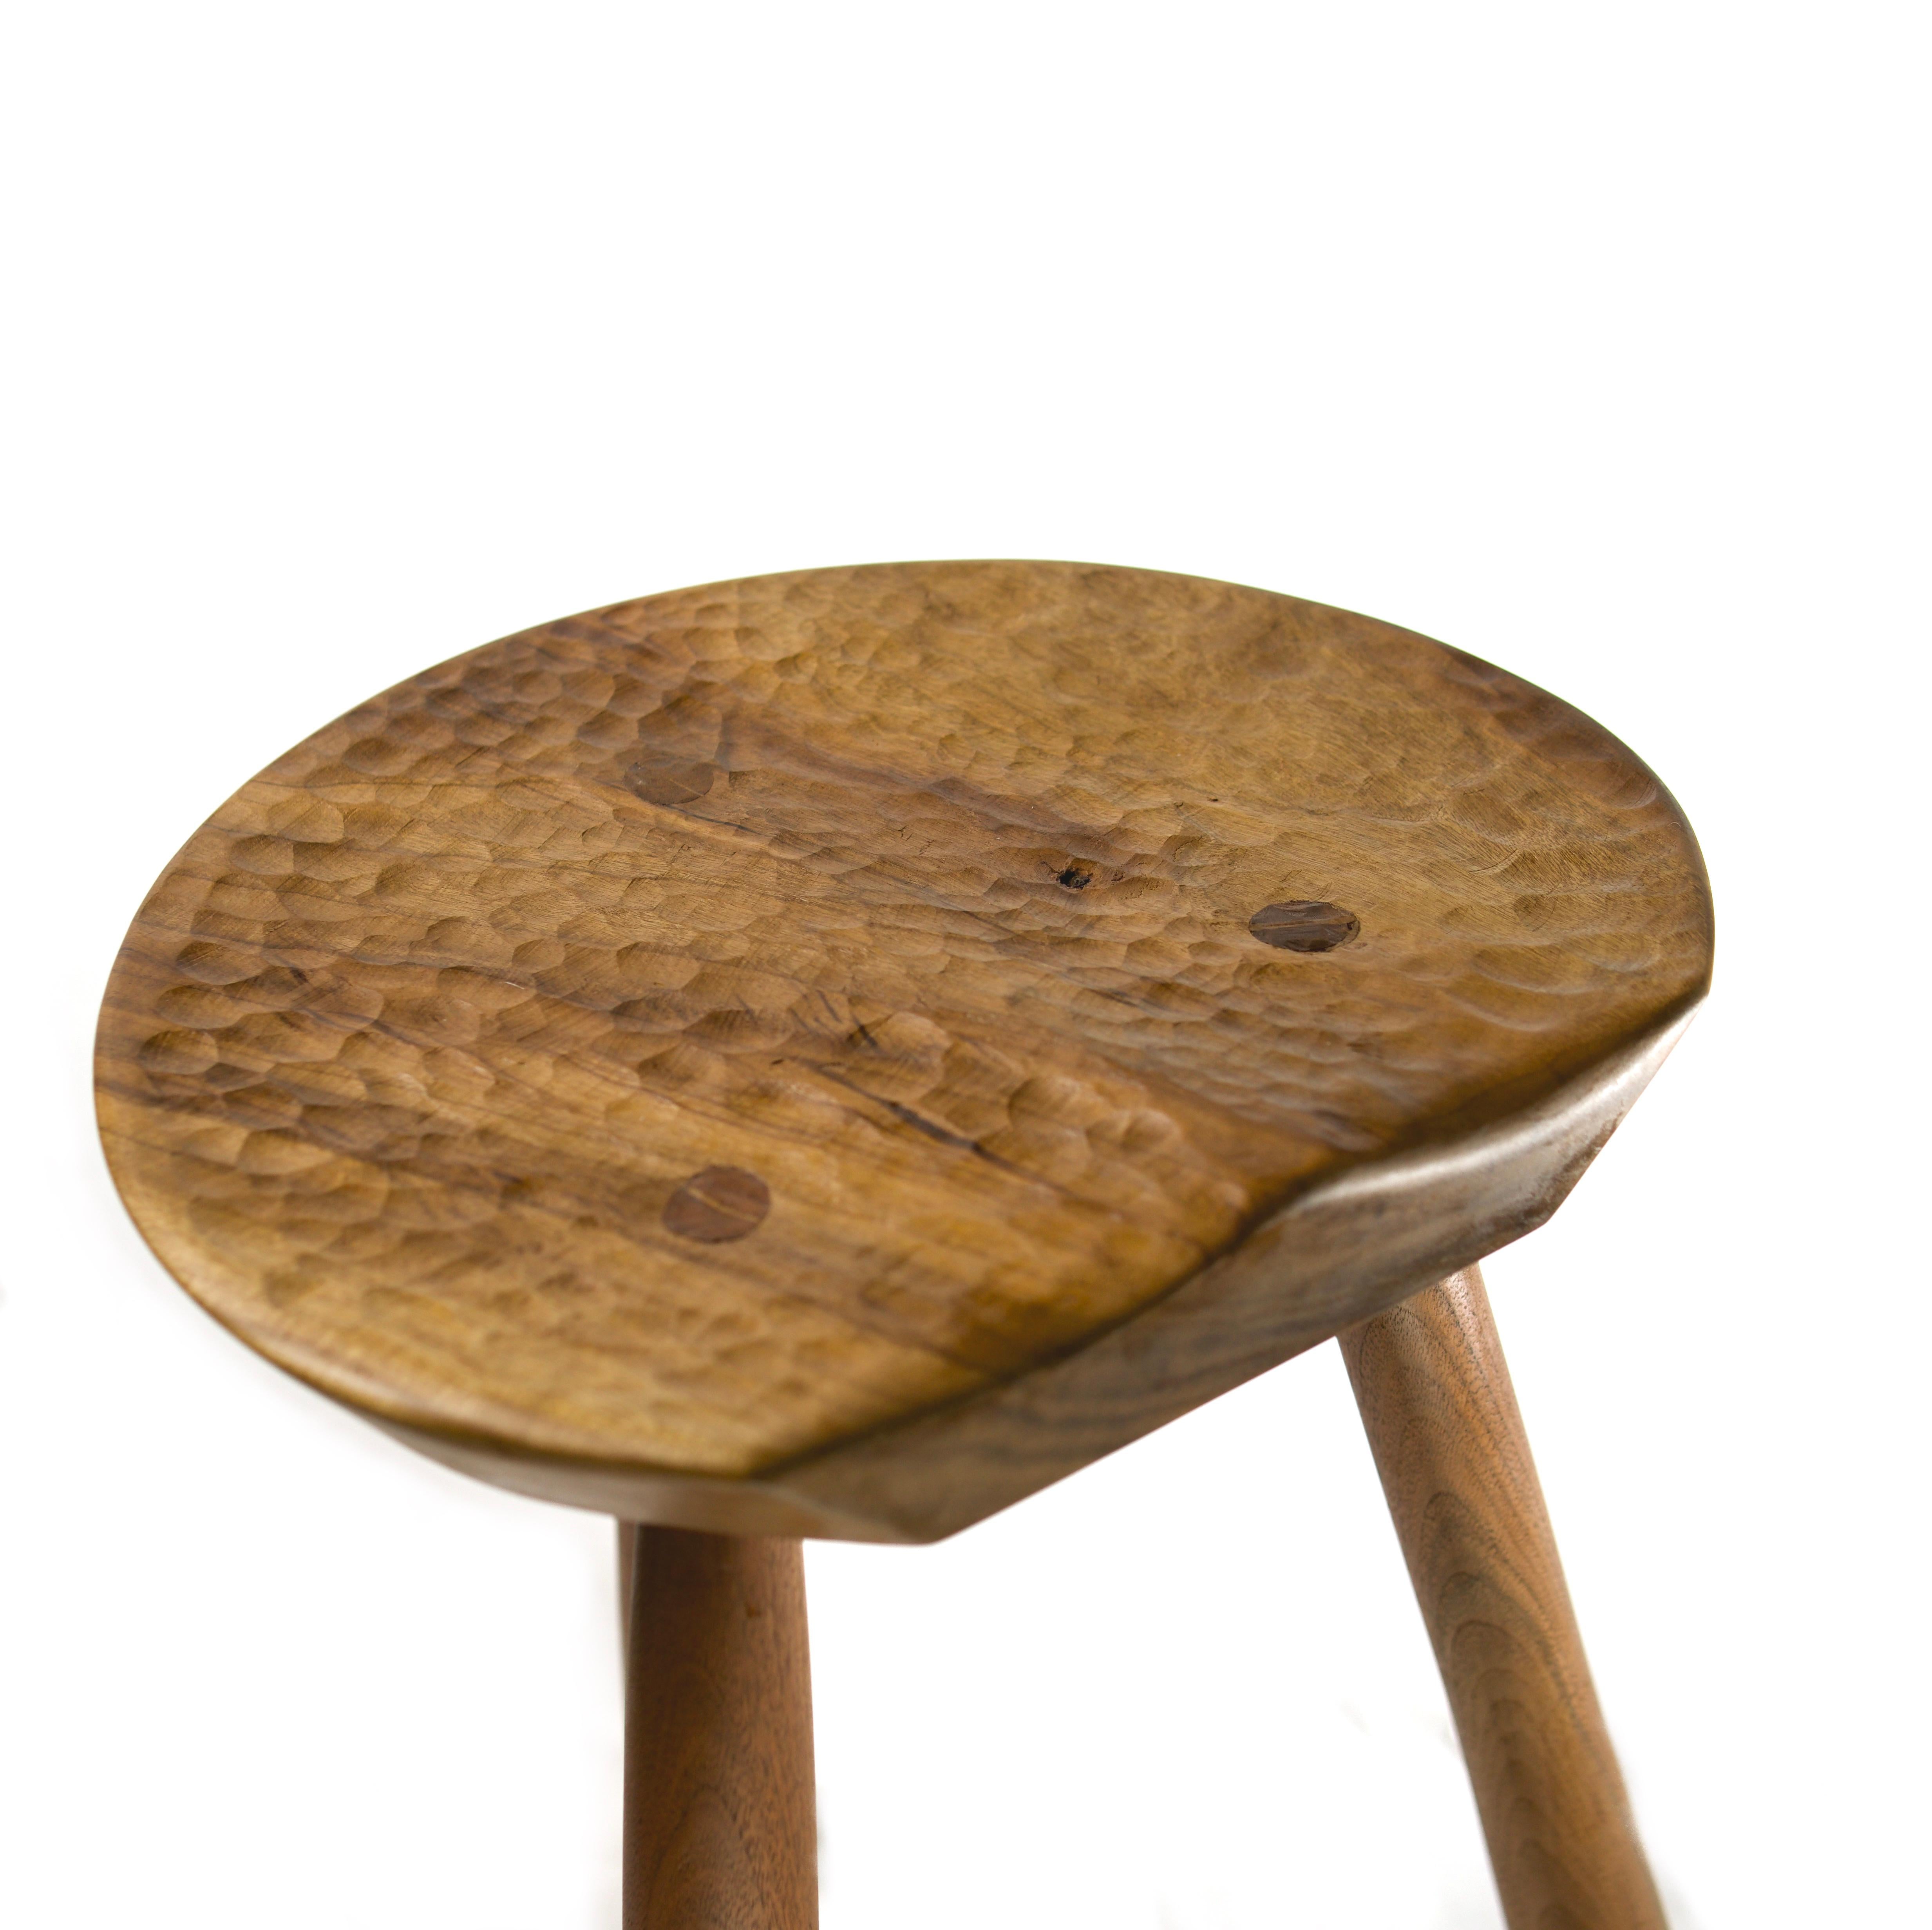 Designed & made of the finest craft by Andrew Brant of Santa Fe, New Mexico, this three legged stool is hand carved to be organic, warm, and inviting in the modern home. 

Inspired a traumatic year of love and loss, this stool was designed in the